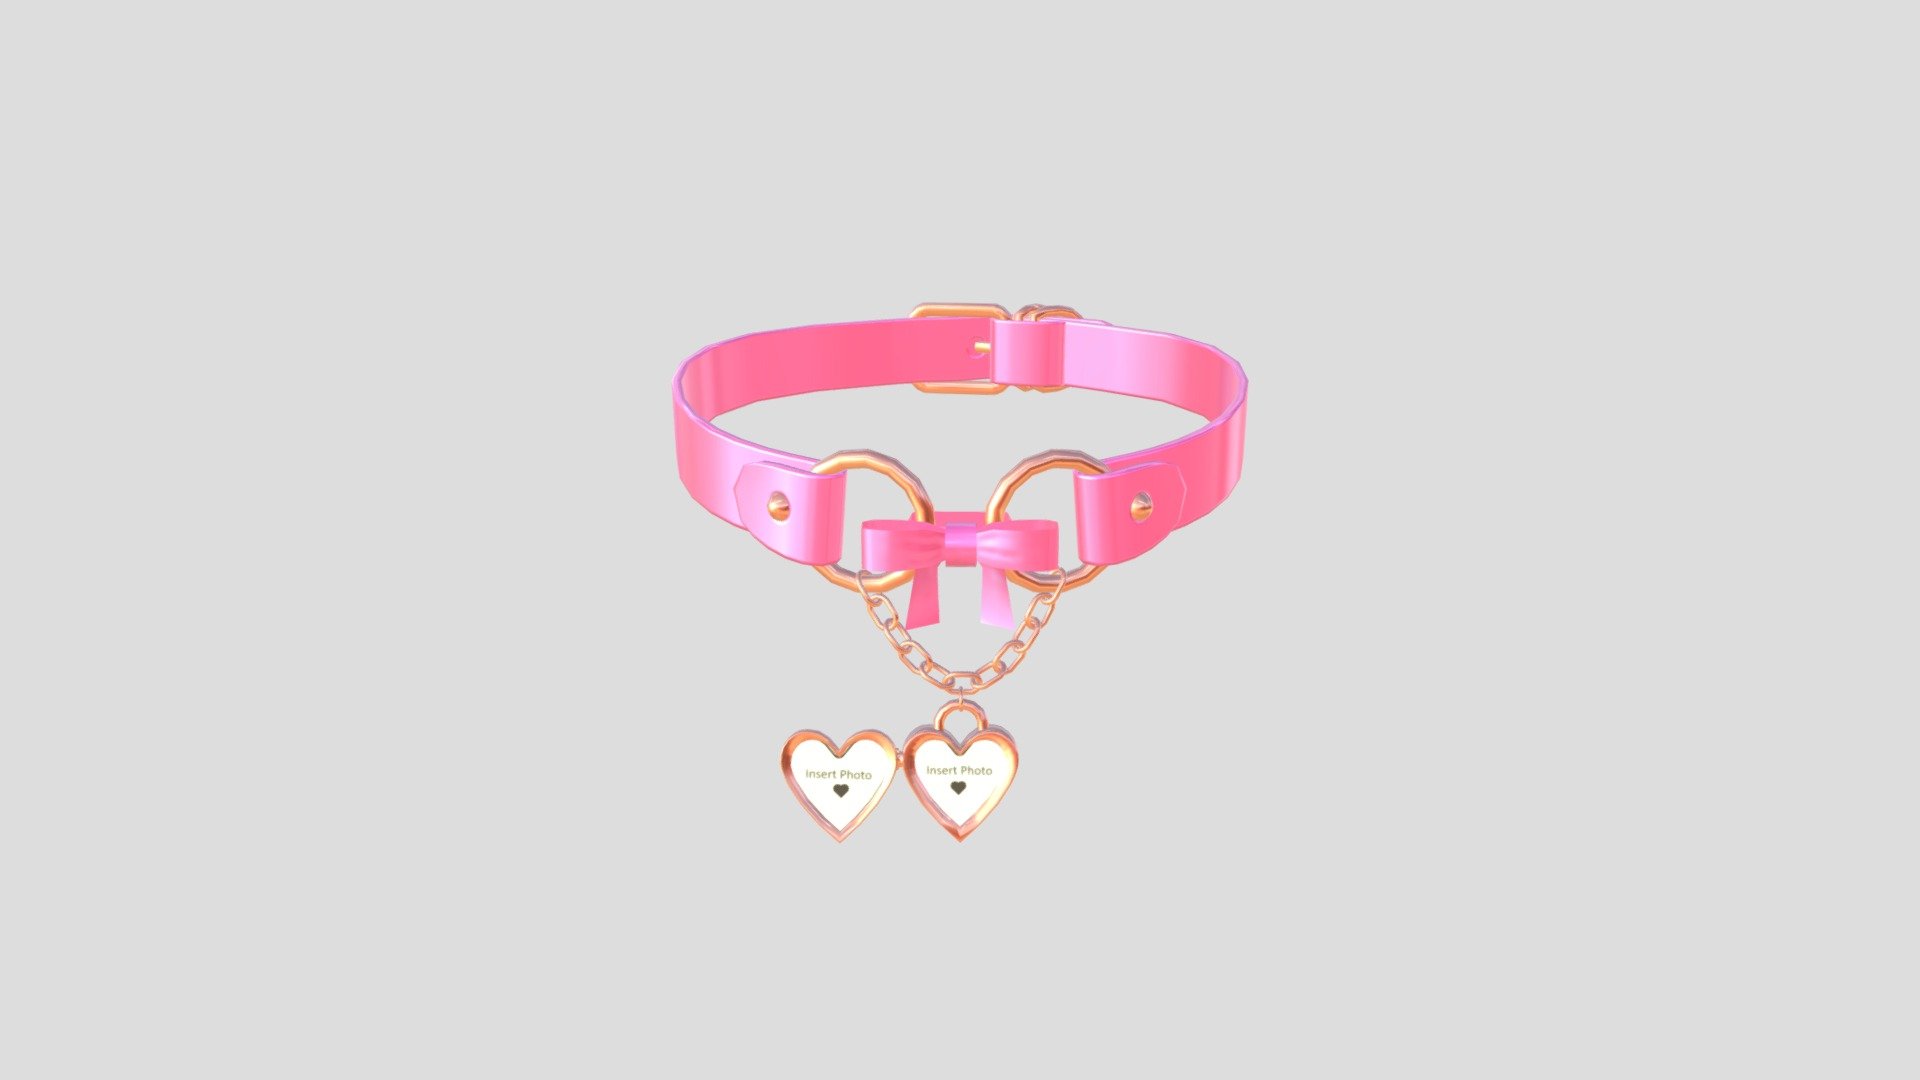 Locket Choker I made to sell / for use in VRChat - Locket Choker By Nuusa - 3D model by Nuusa 3d model